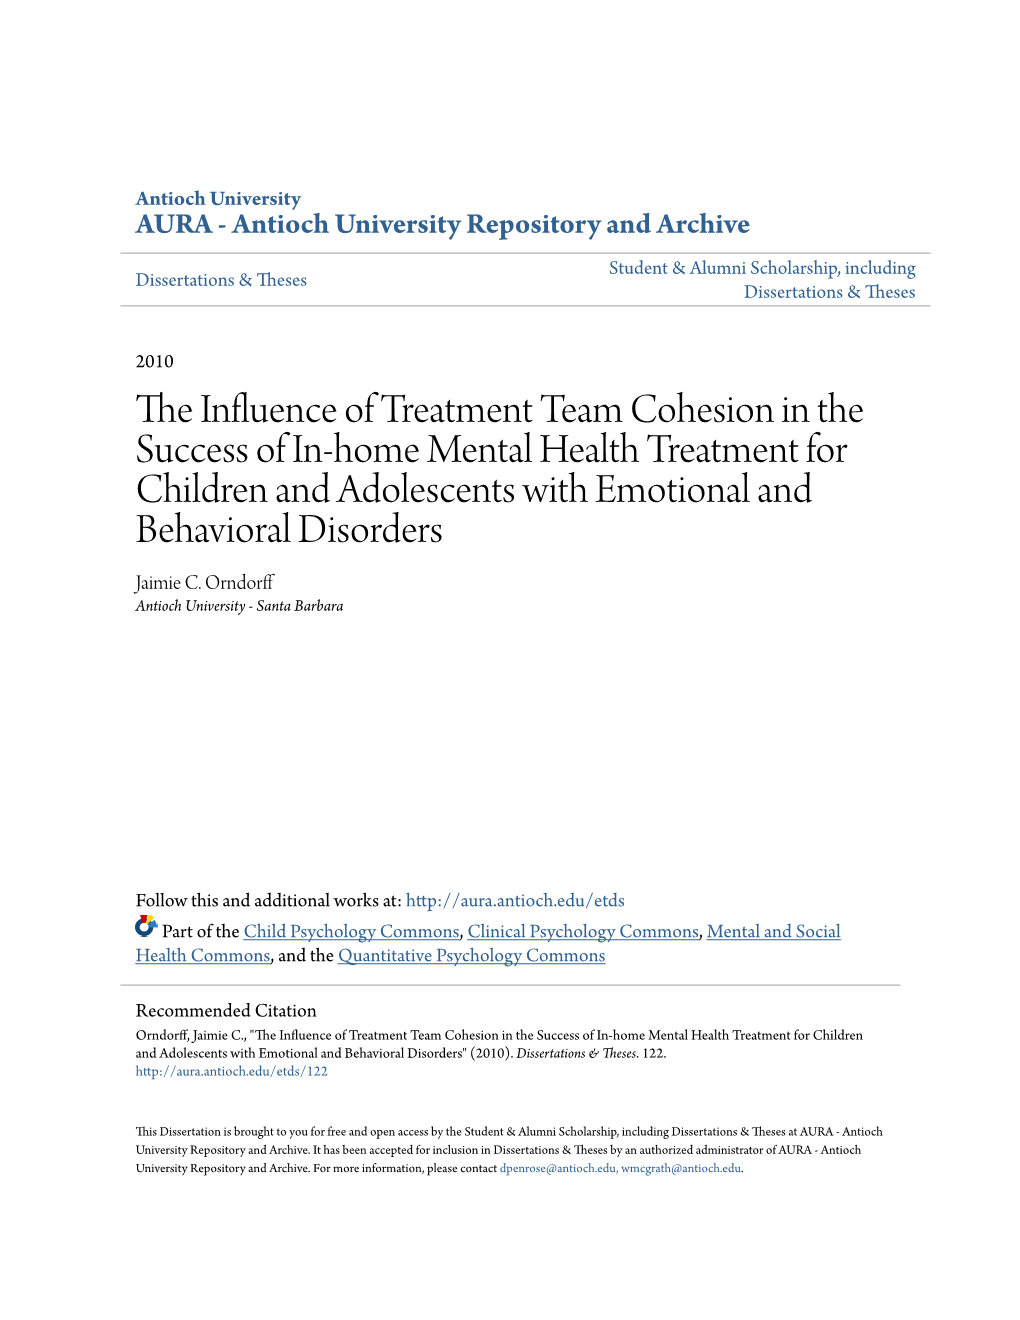 The Influence of Treatment Team Cohesion in the Success of In-Home Mental Health Treatment for Children and Adolescents with Emotional and Behavioral Disorders